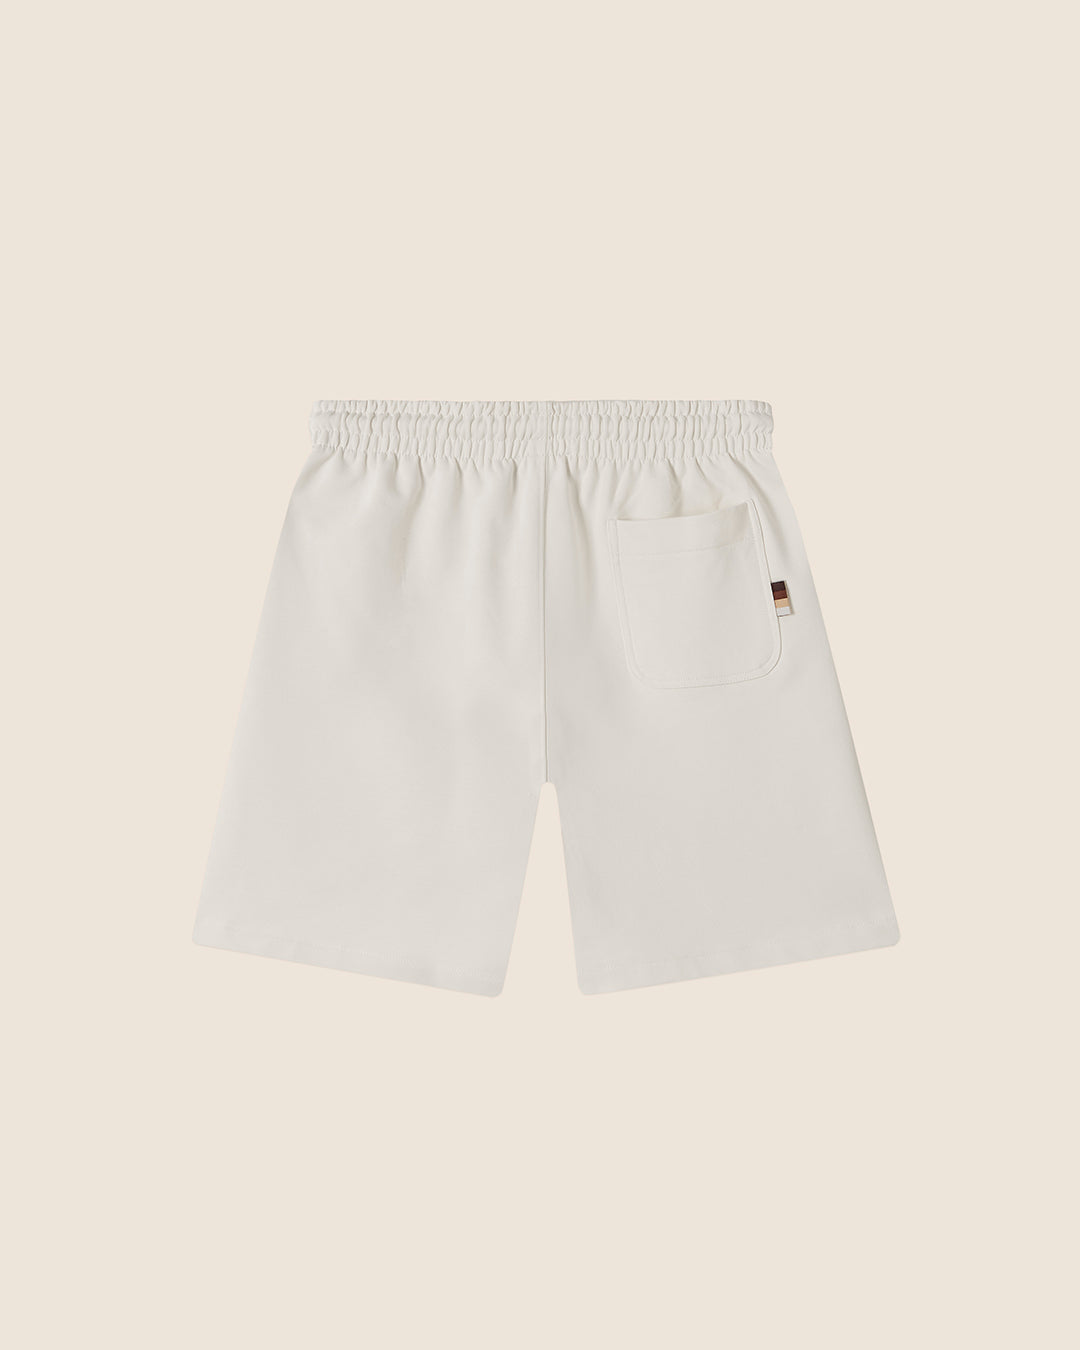 CLASSIC BOXERS DOUBLE PACK - WHITE – NUDE PROJECT